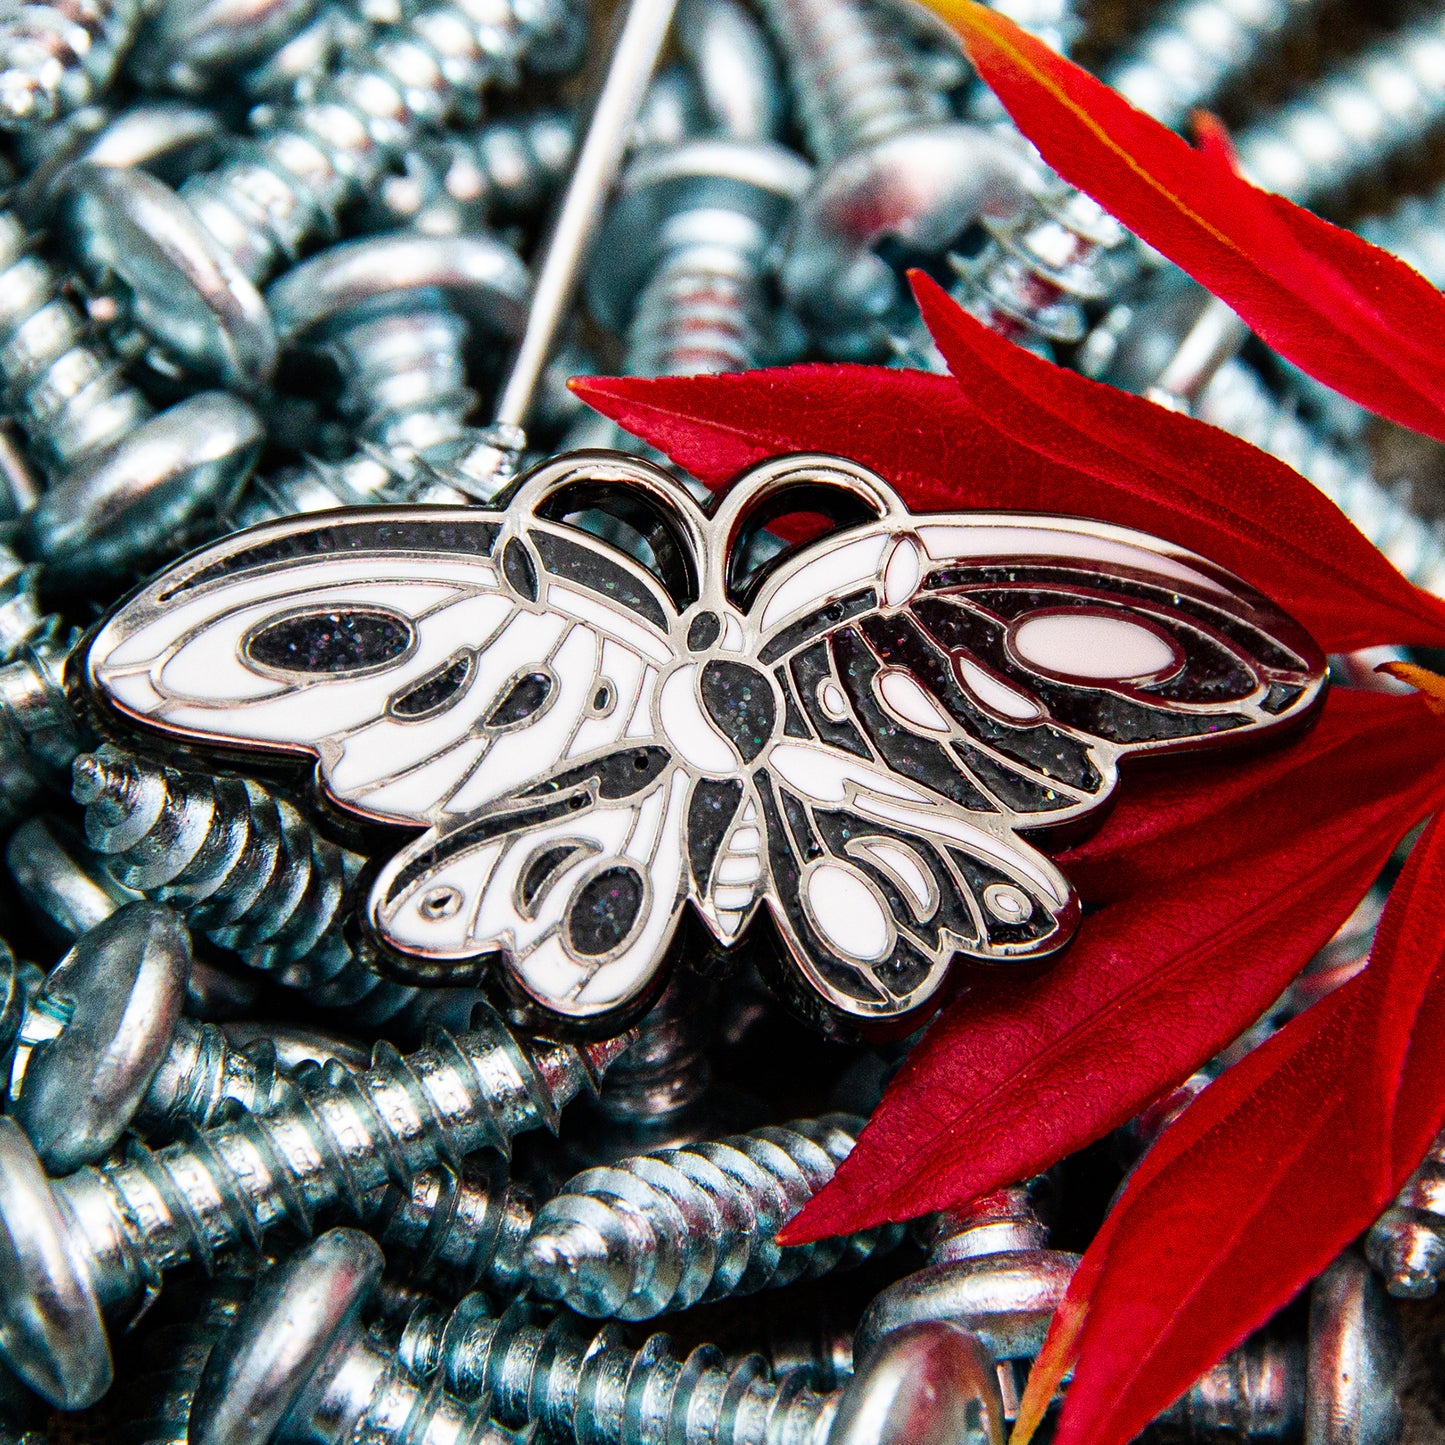 White and sparkling black Iron Widow butterfly enamel pin on pile of screws with red flower.